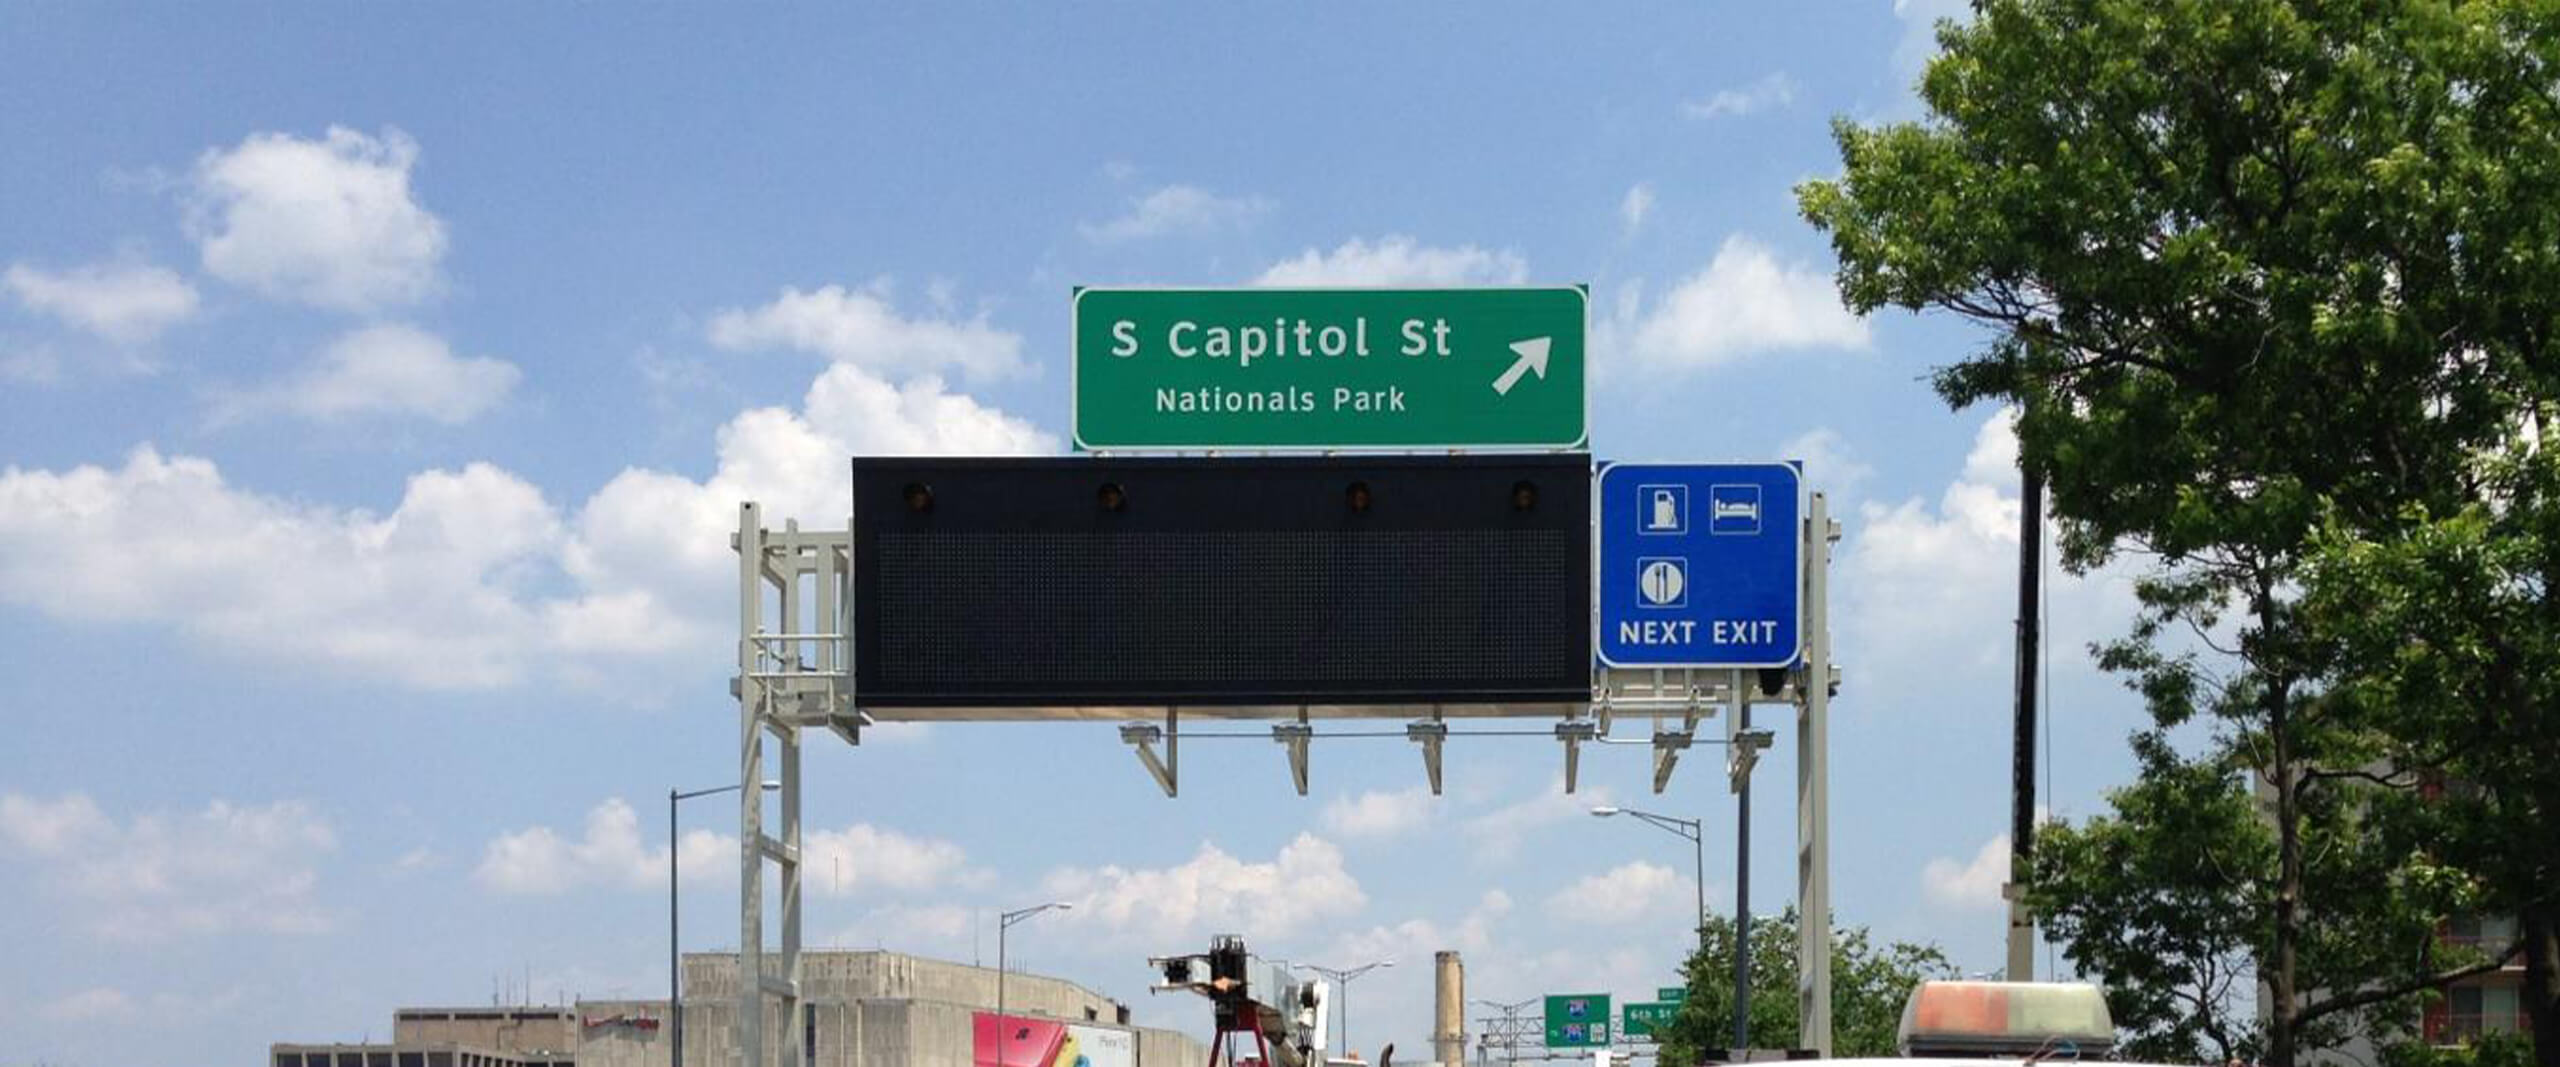 A dynamic message sign in Washington, DC